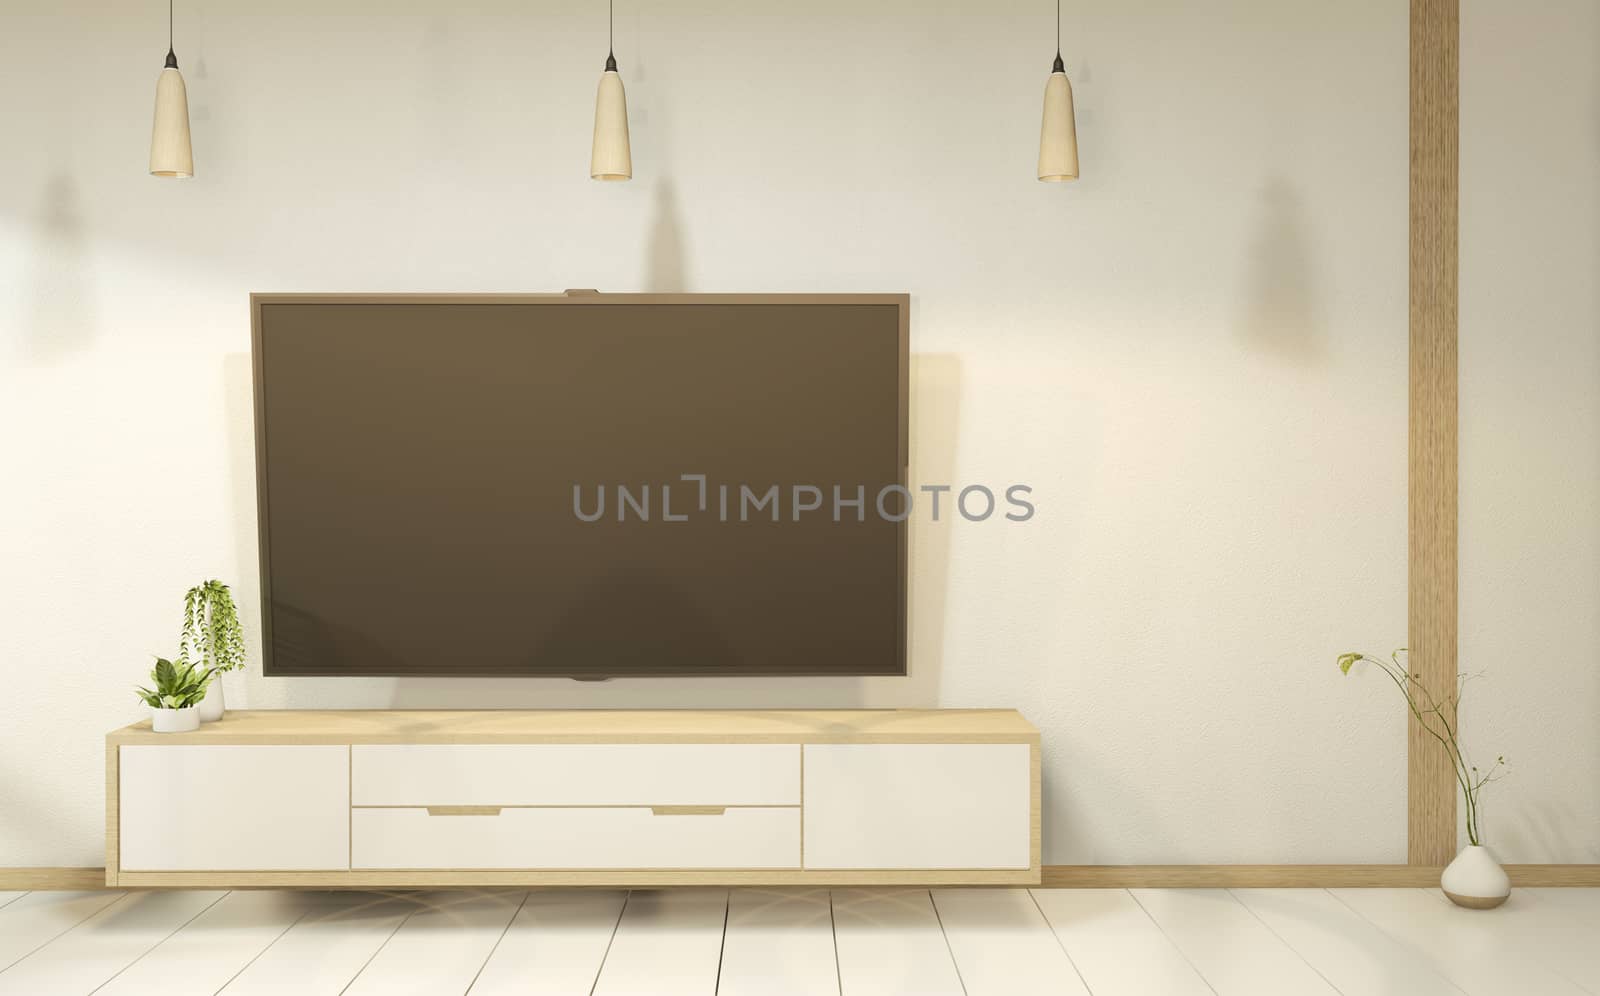 Cabinet wooden in white empty interior room style, 3d rendering